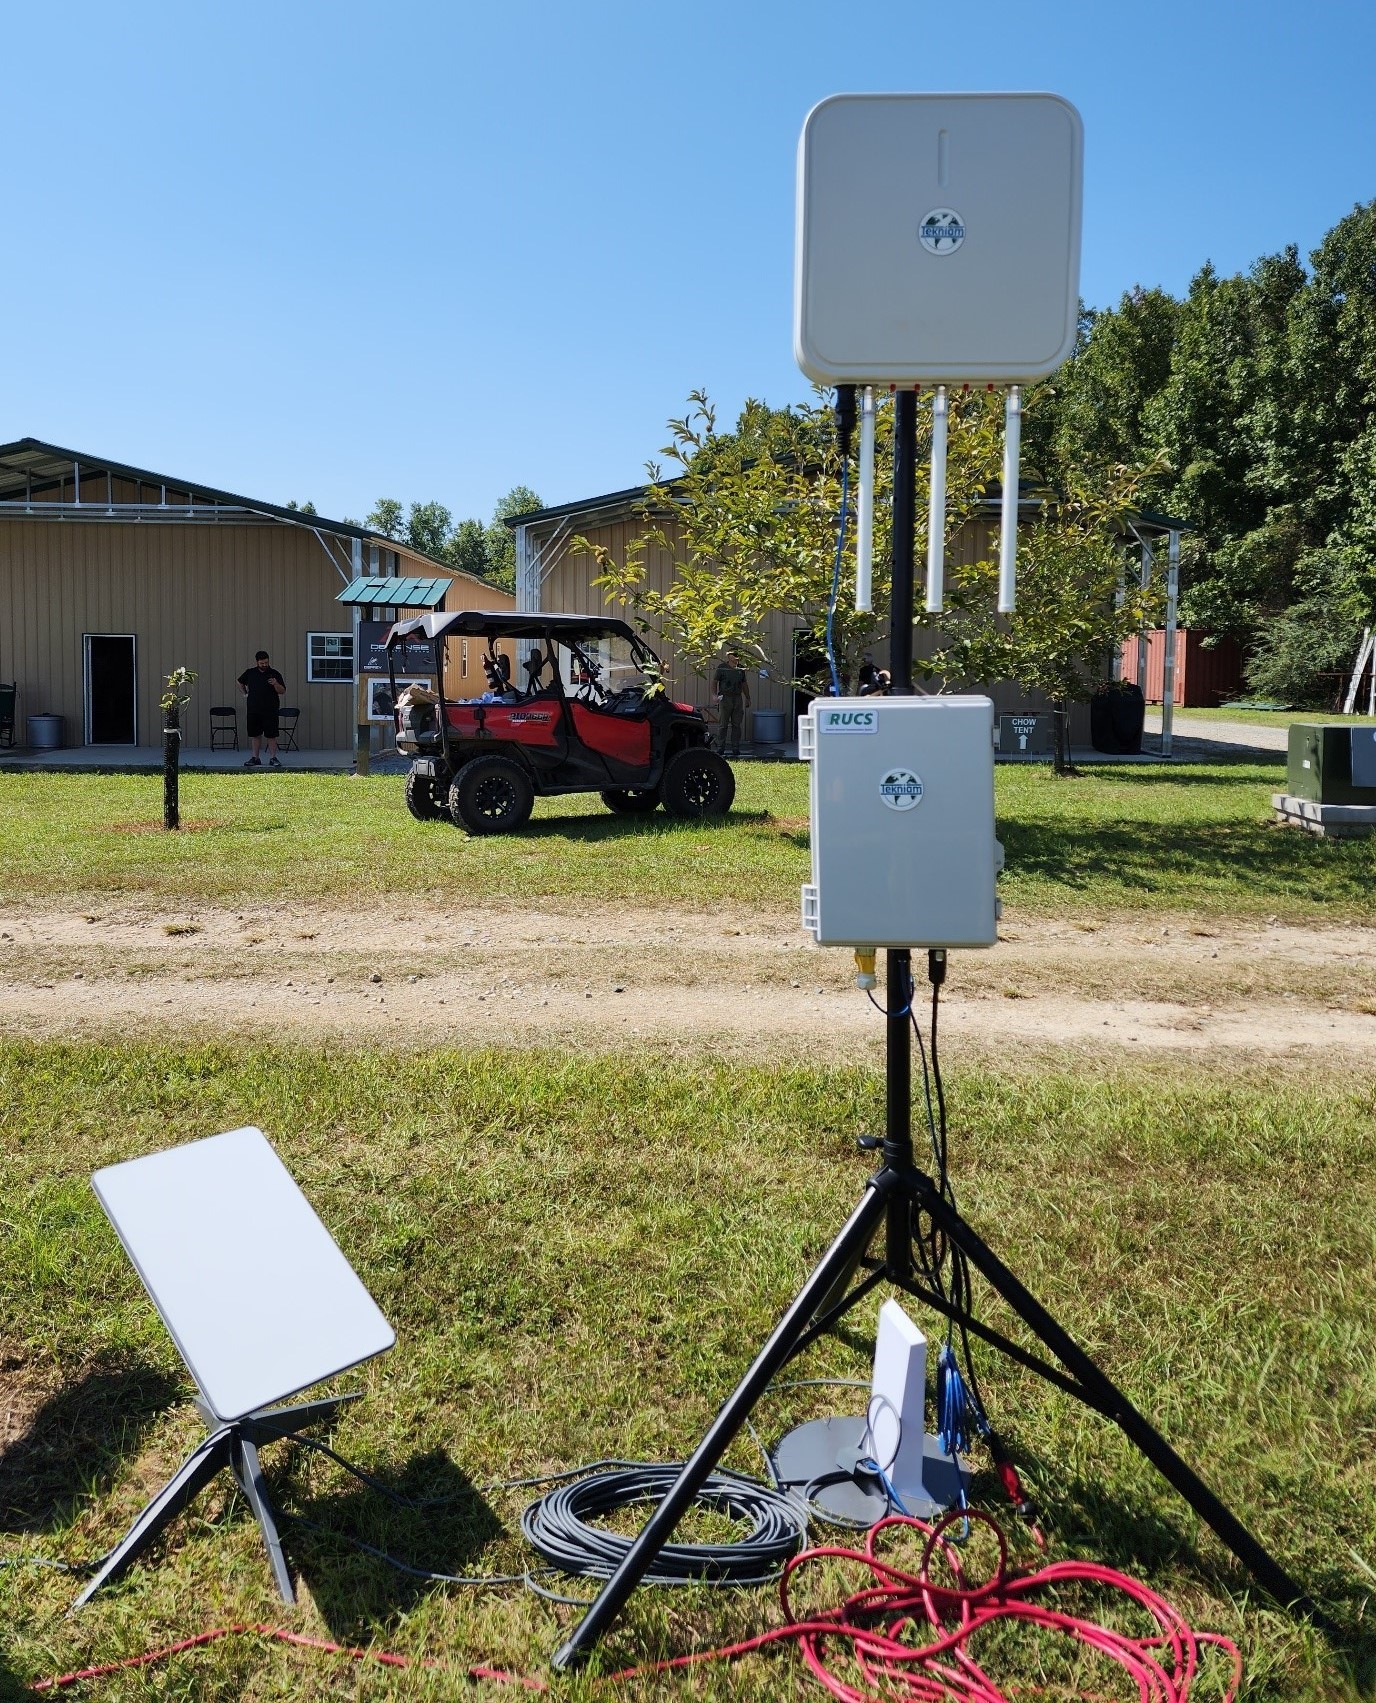 Sets up in minutes, shown here is the satellite version of the Tekniam solution which provides communications capabilities to up to 250 users within a quarter-mile radius